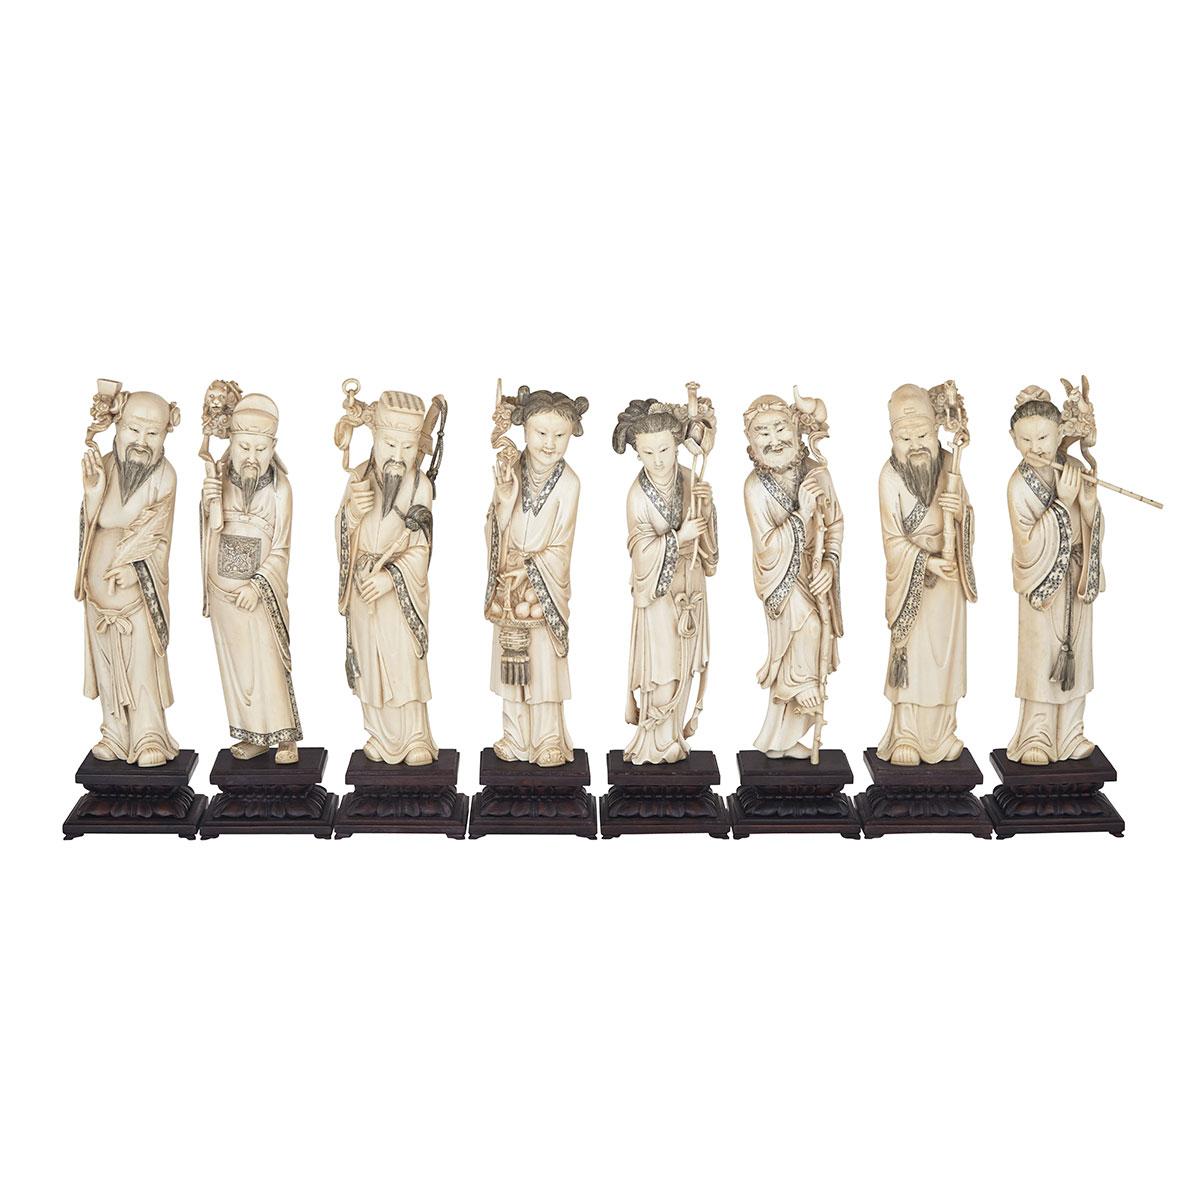 Rare Complete Set of Eight Ivory Carved Immortals, Republican Period, Circa 1940